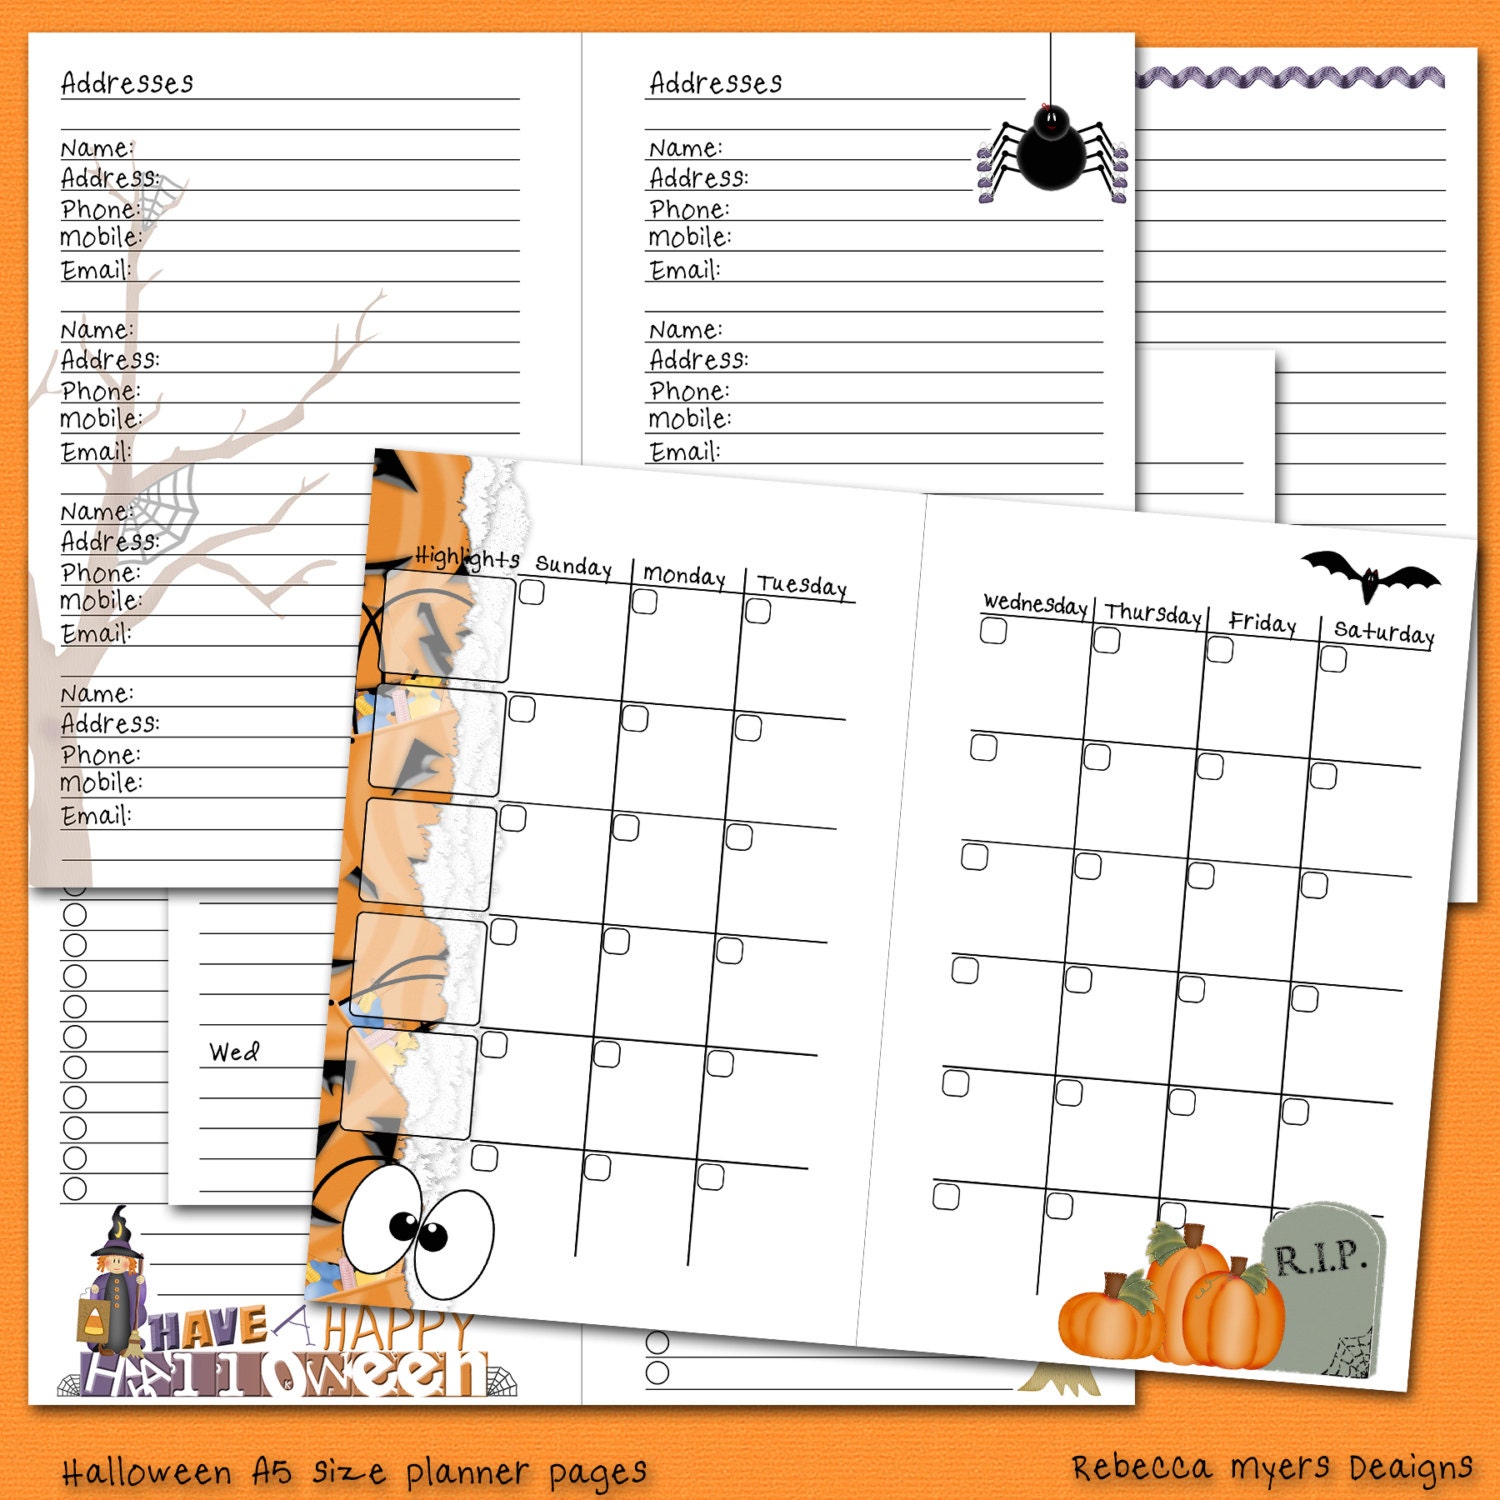 halloween-filofax-franklin-covey-a5-by-rebeccamyersdesigns-on-etsy